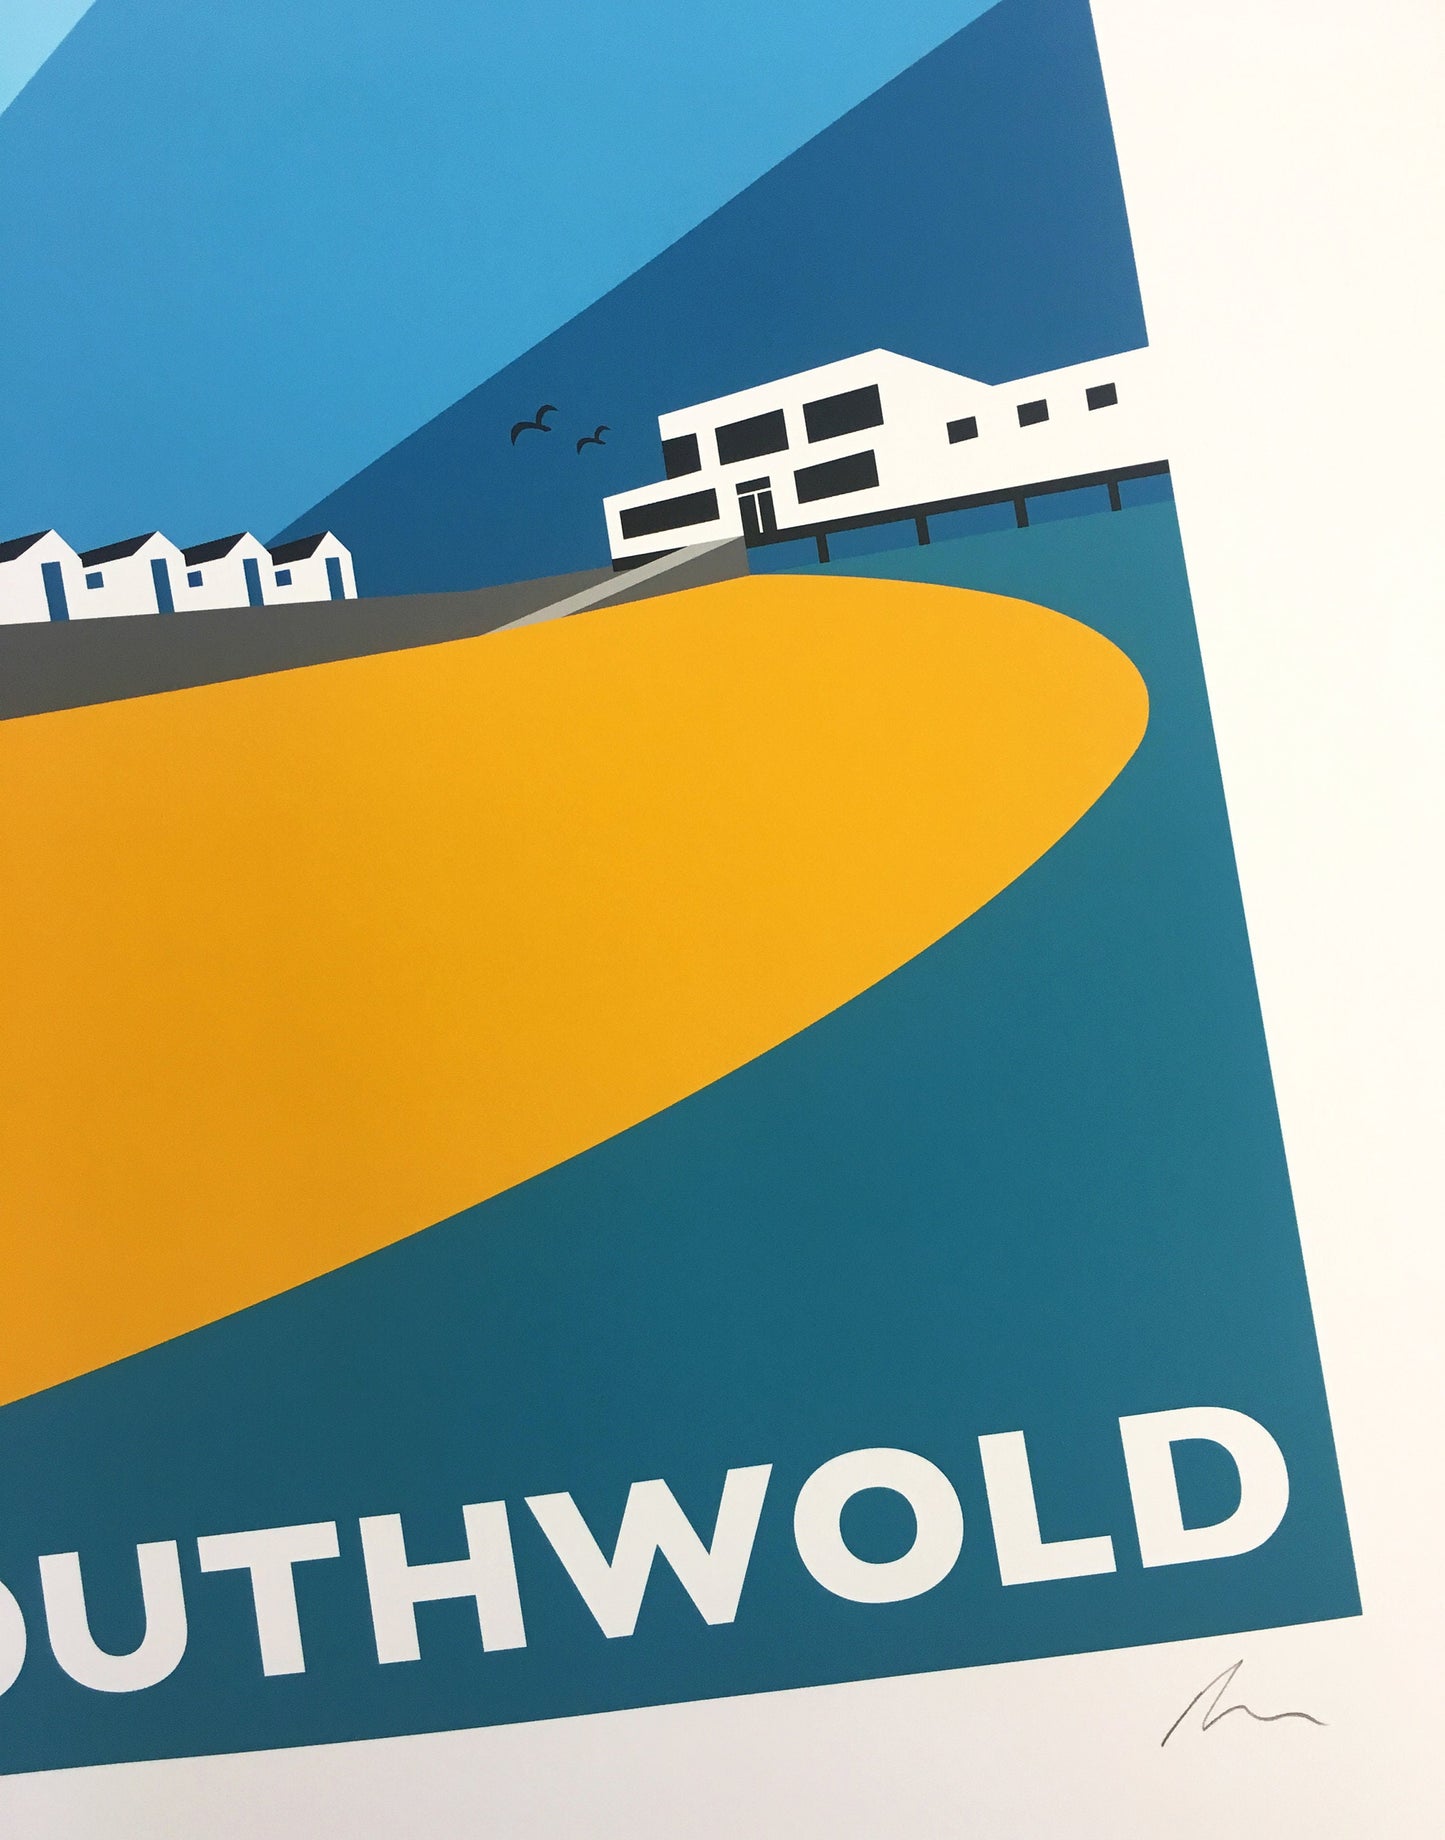 SOUTHWOLD Travel Poster - Beach huts and Southwold Pier - Art Deco Print - Illustration by Rebecca Pymar